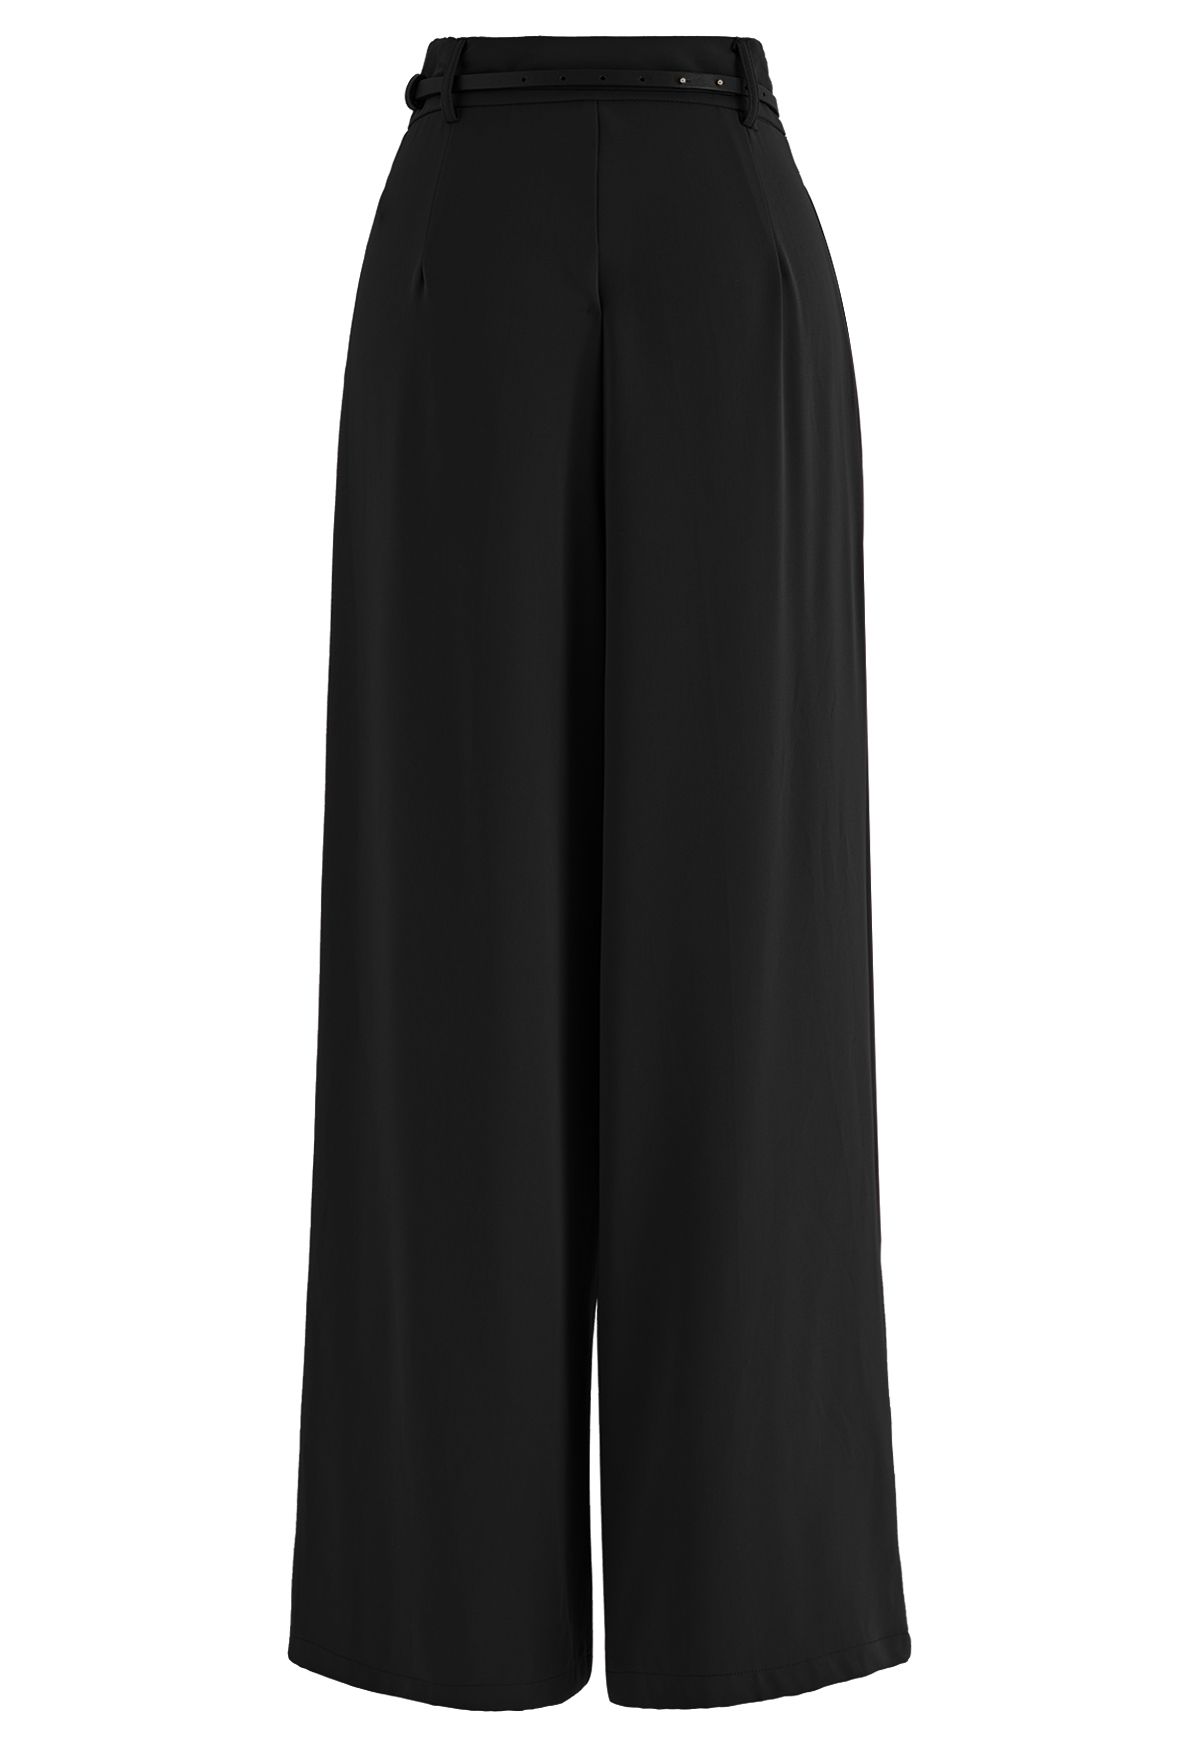 Pleat Front Wide-Leg Belted Pants in Black - Retro, Indie and Unique ...